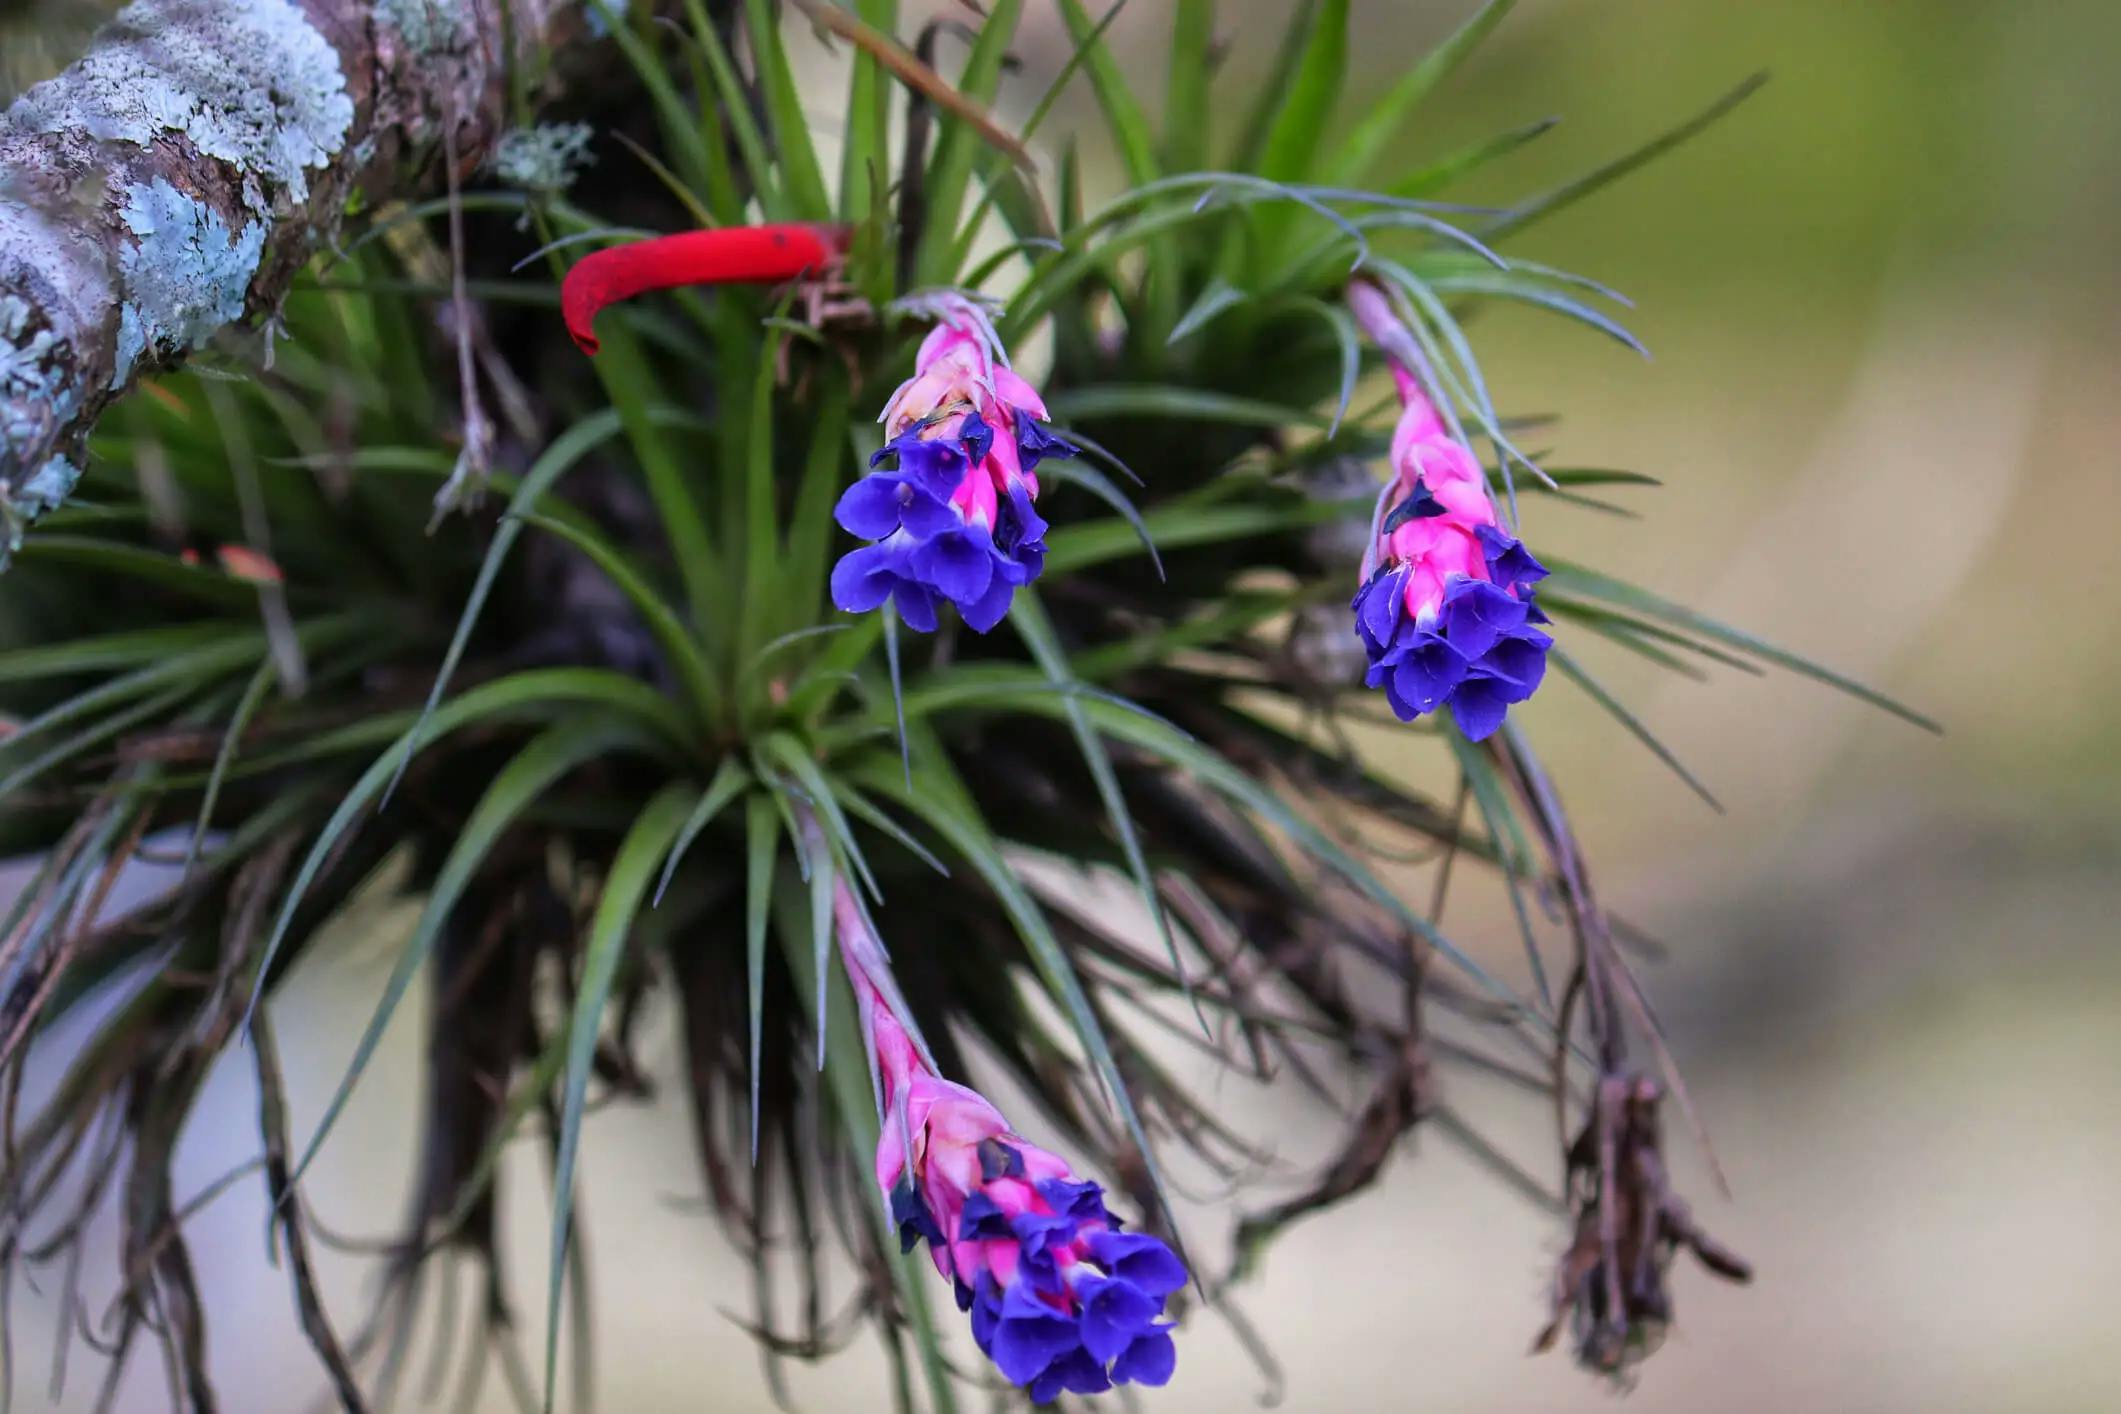 Air plants that are blooming with blue-purple flowers.